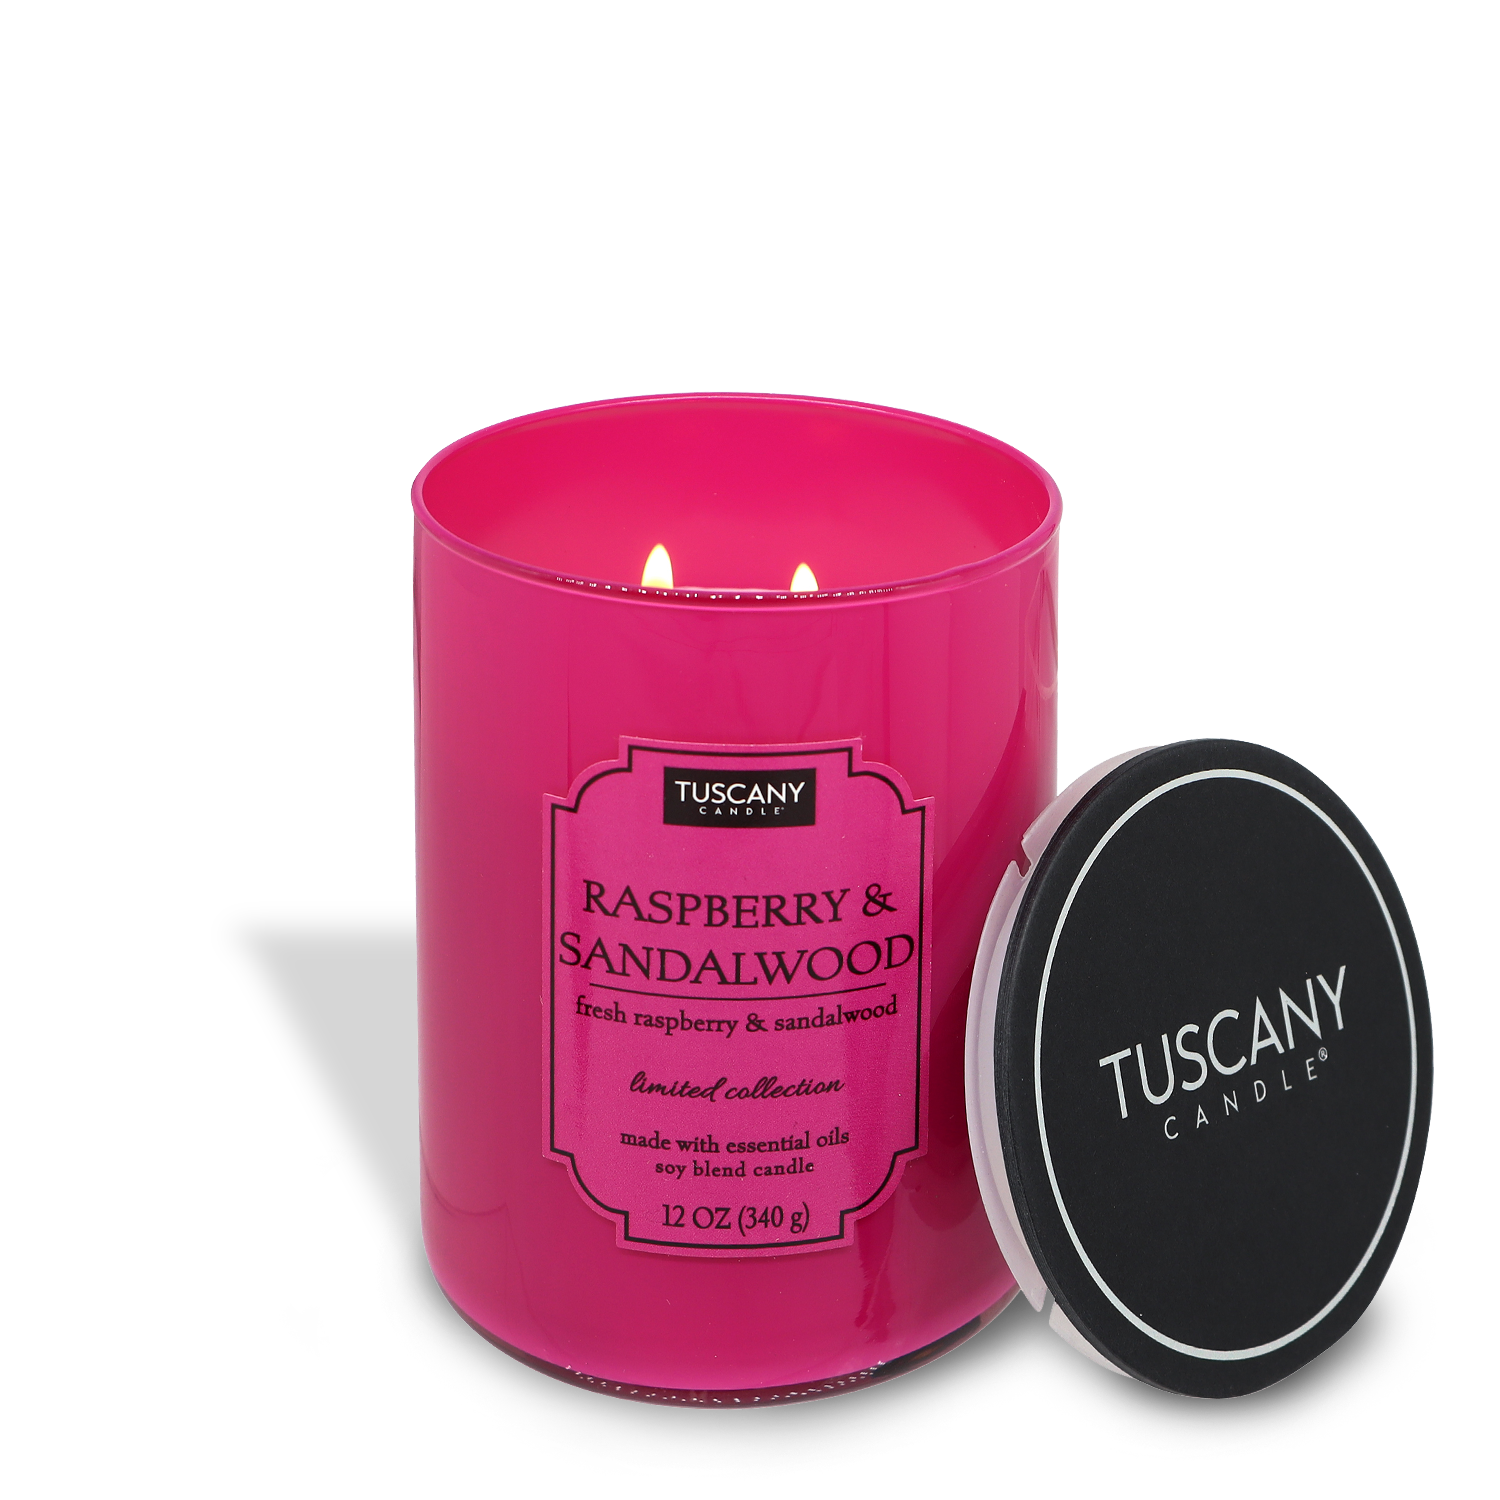 A lit Raspberry & Sandalwood (12 oz) scented candle in a pink glass container with a black lid placed beside it, labeled "Tuscany Candle® EVD.